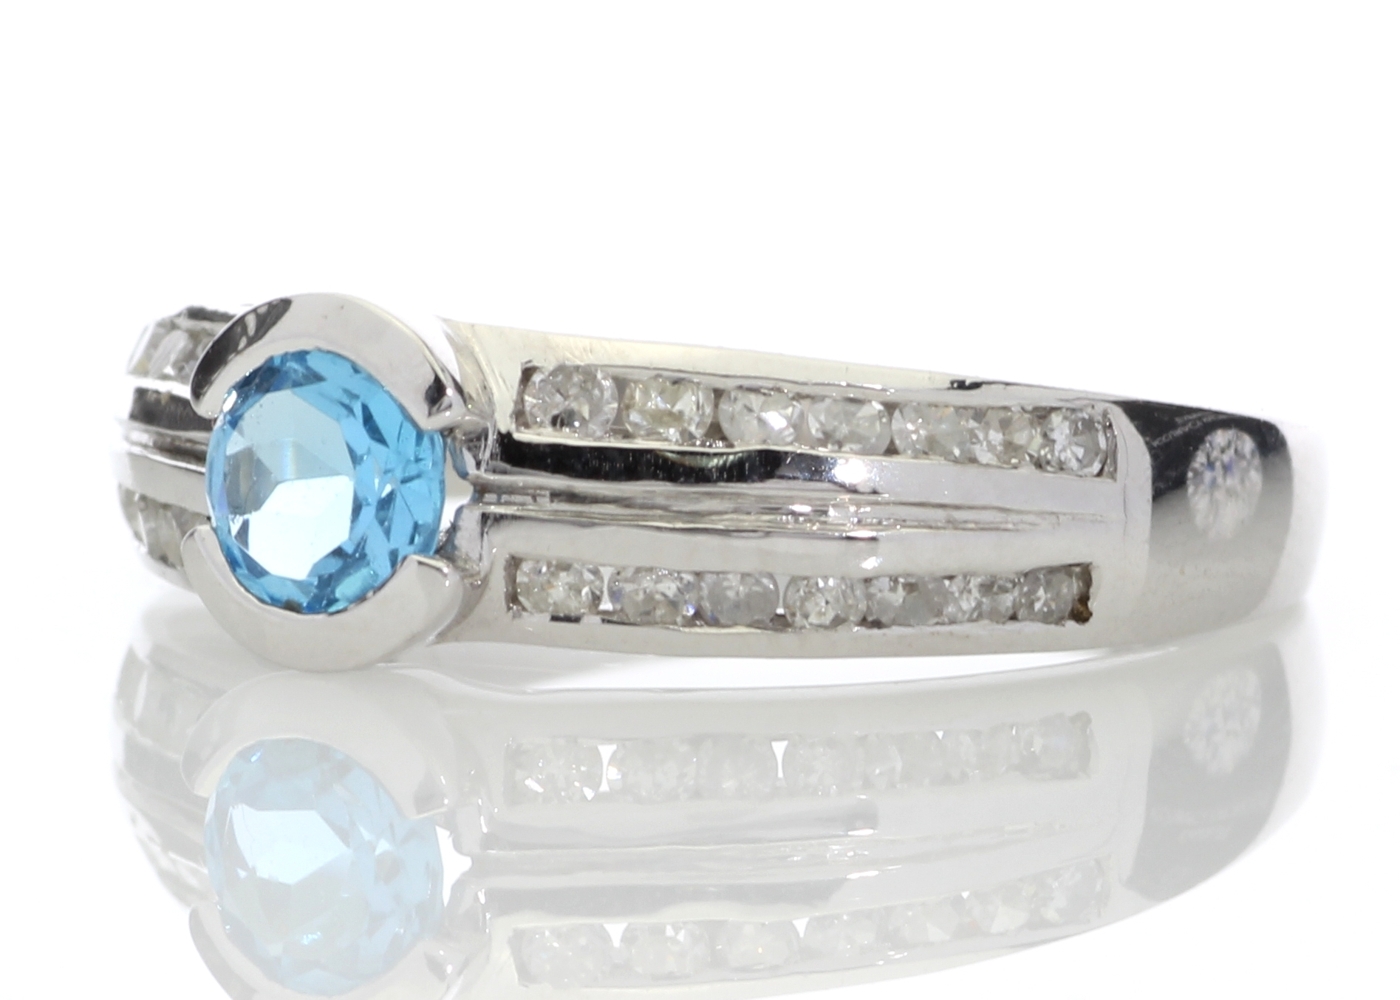 9k White Gold Double Channel Set Diamond and Blue Topaz Ring - Image 2 of 5